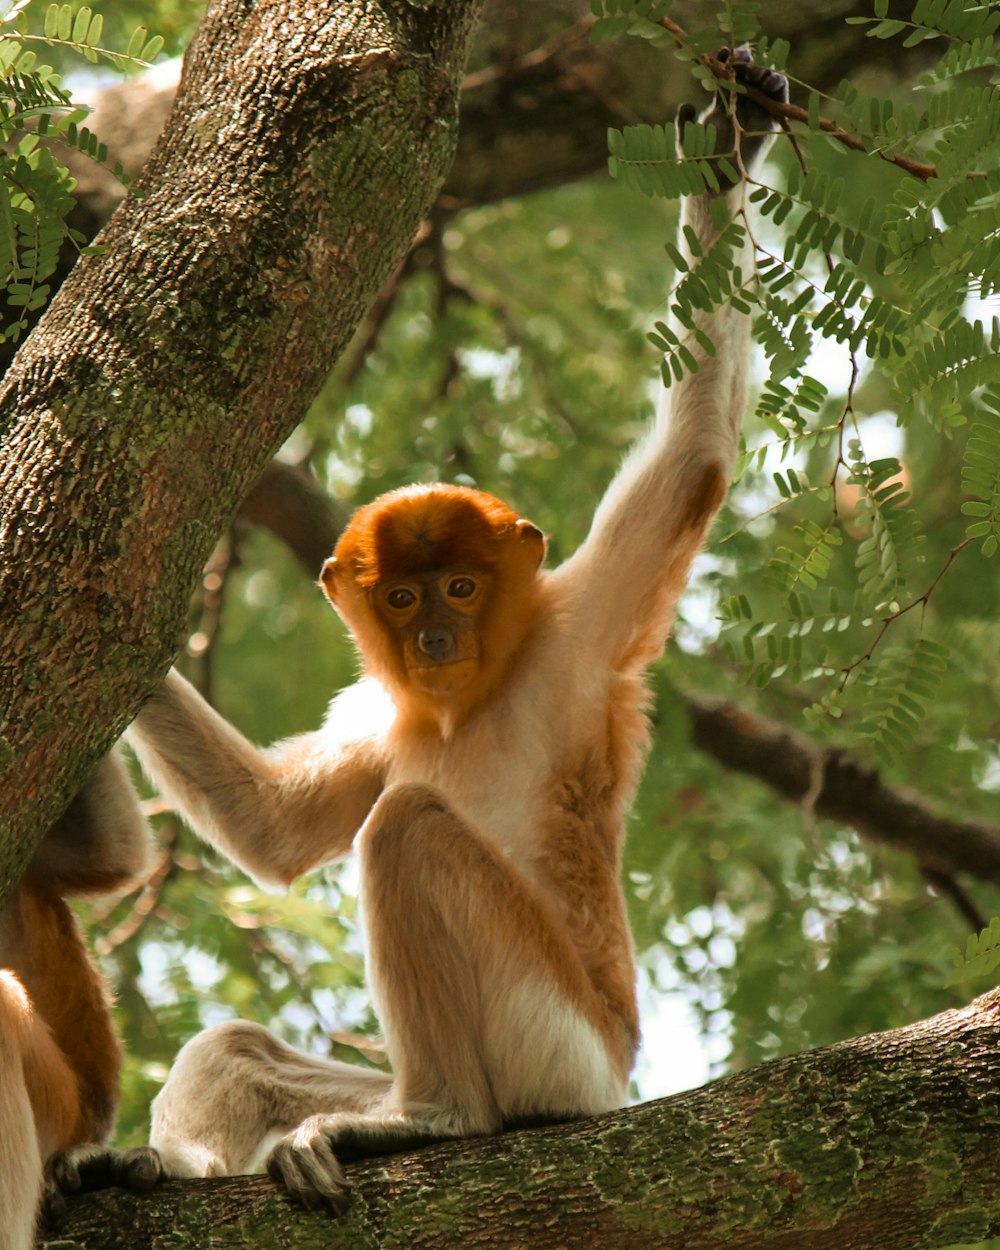 a brown and white monkey hanging from a tree branch